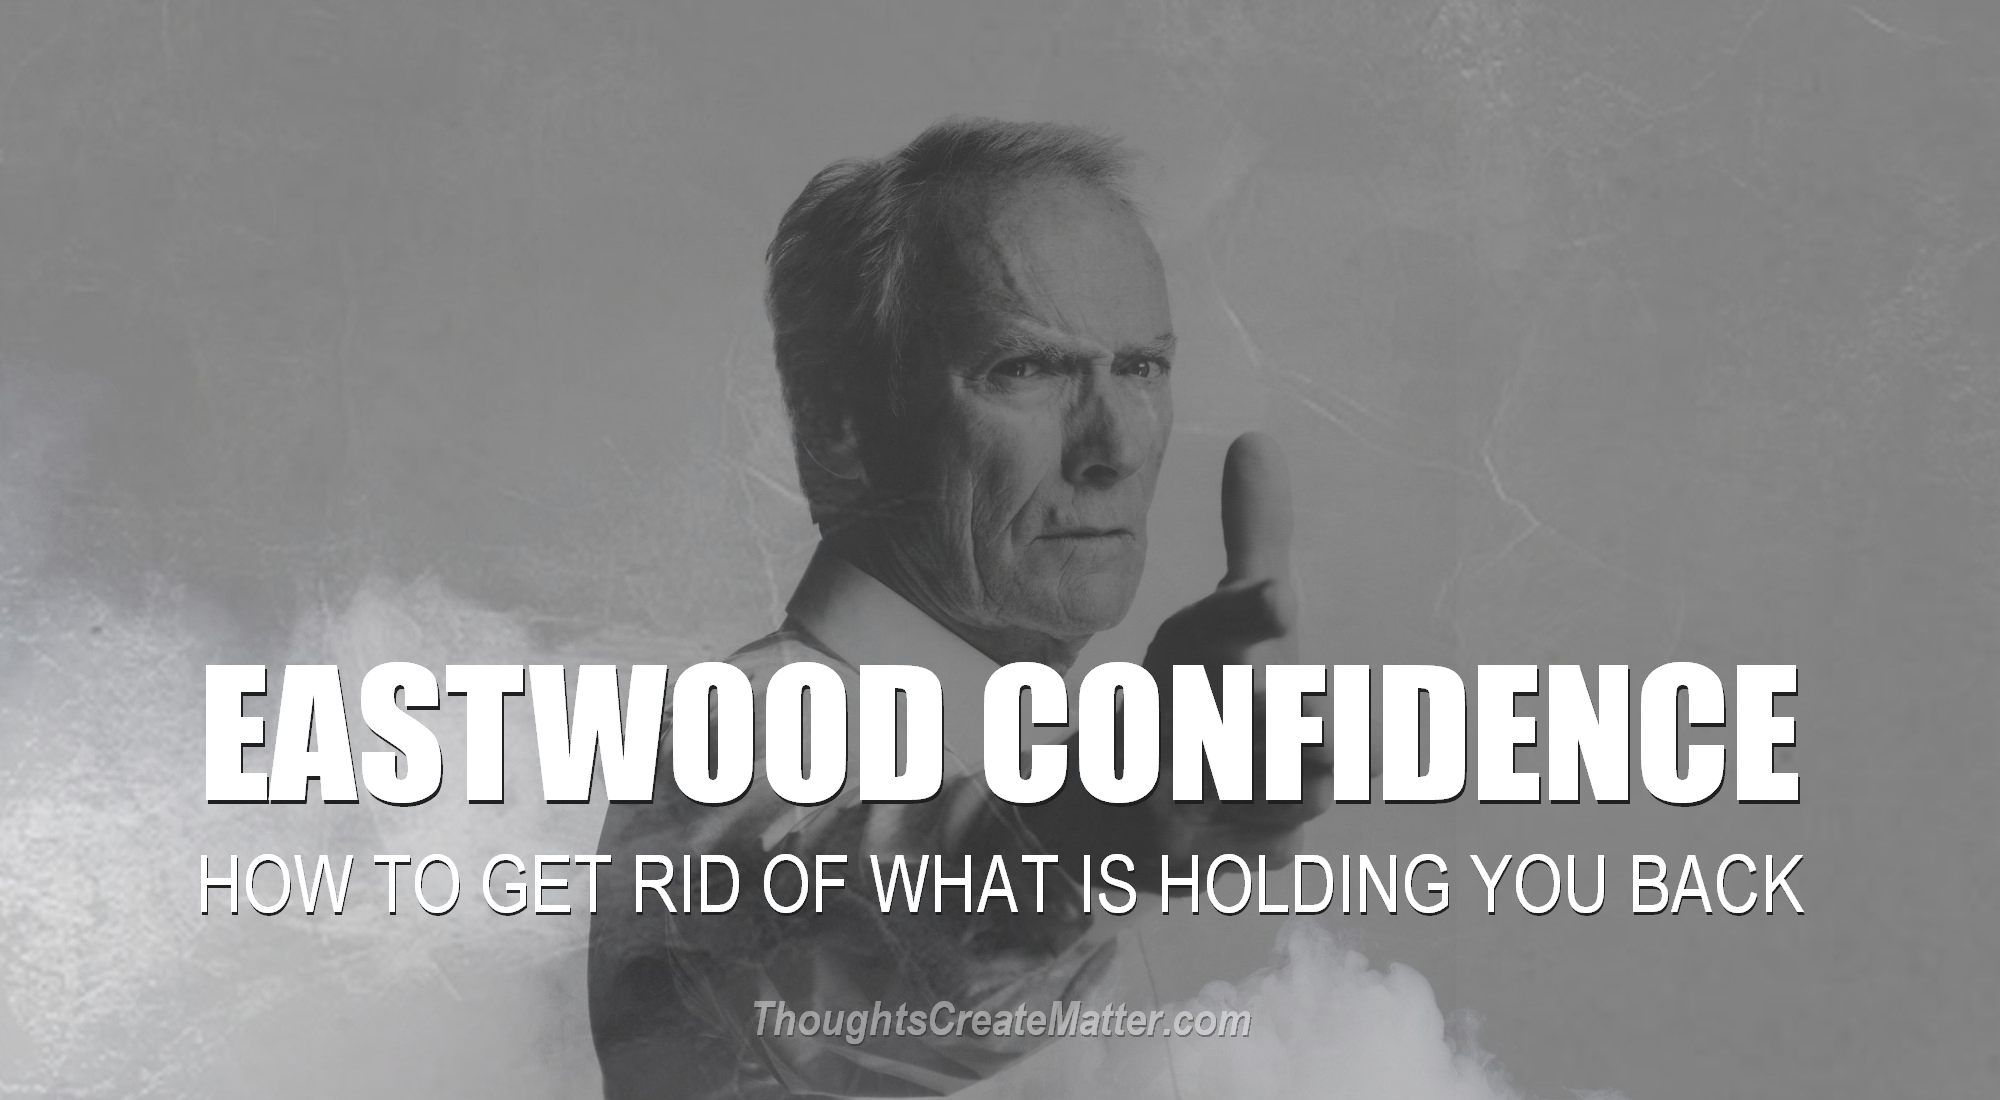 What is an inner judge and if I have one, how do I stop it? Eastwood confidence.